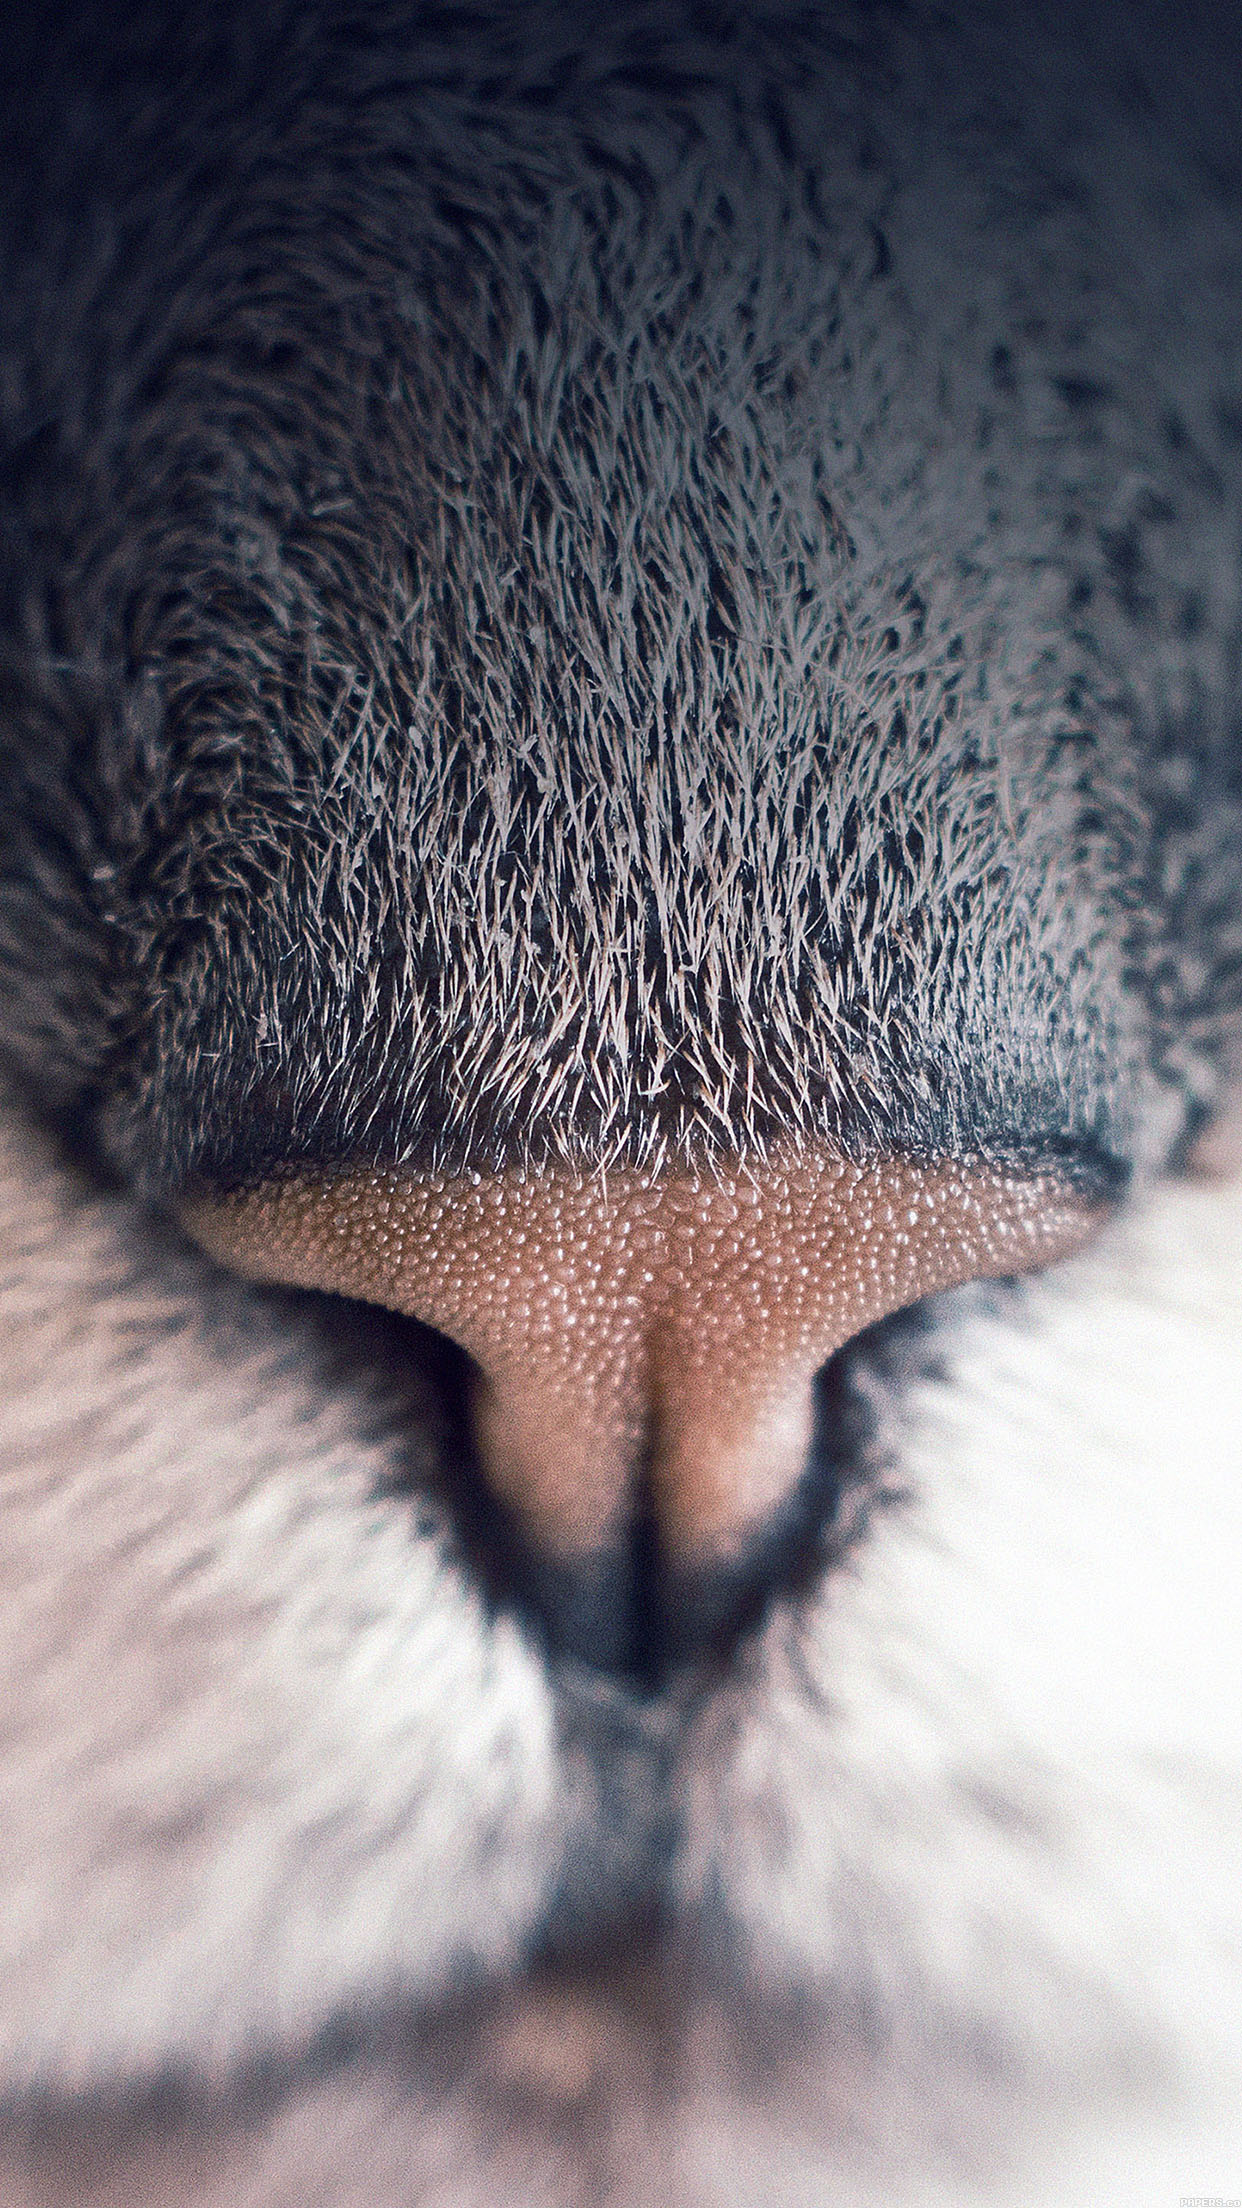 Wallpaper 18hs Cat Nose Animal Android wallpaper